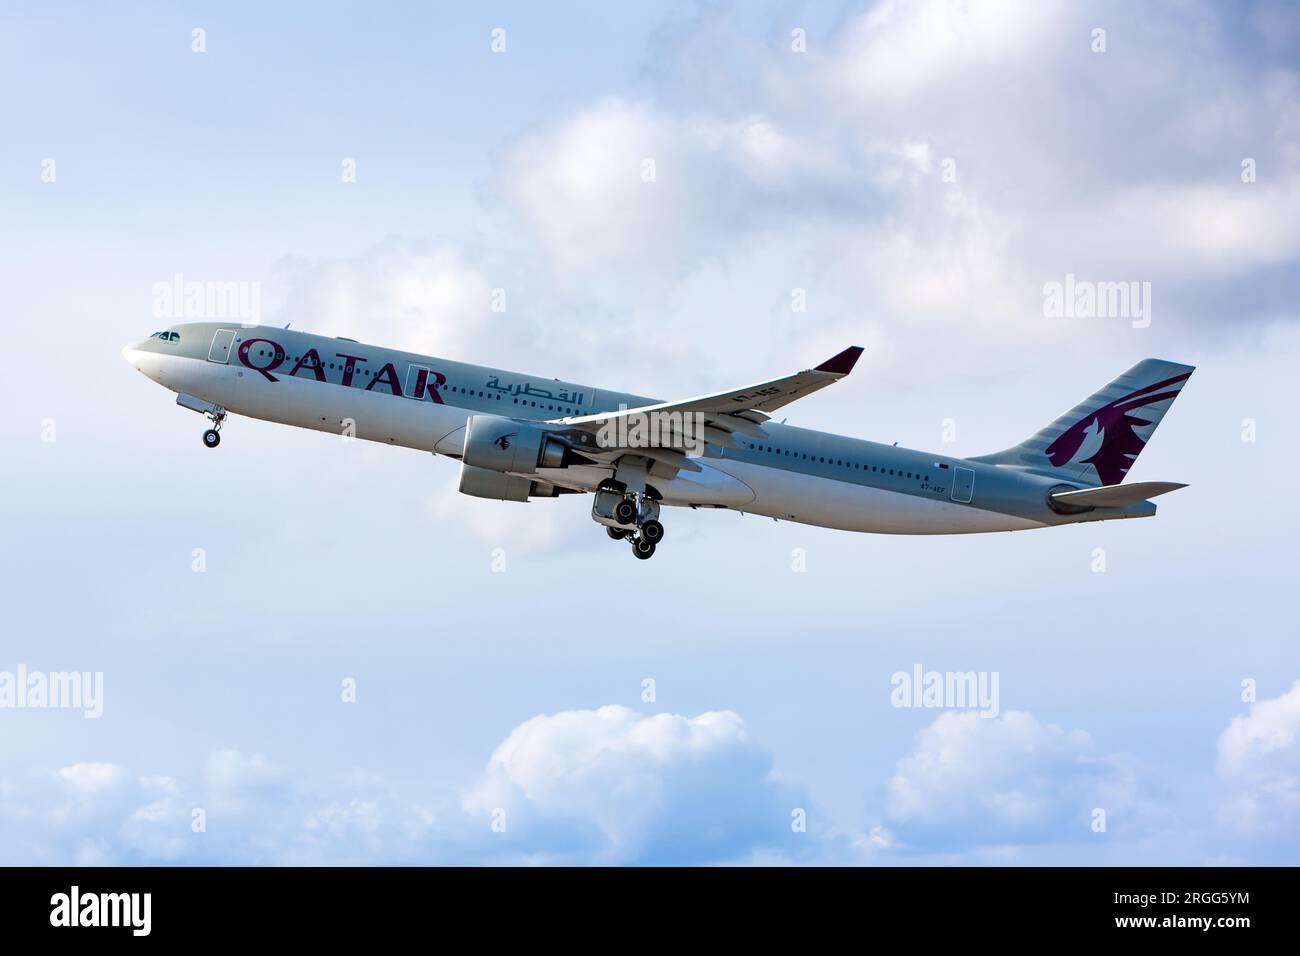 Boryspil, Ukraine - February 11, 2020: Airplane Airbus A330-300 (A7-AEF) of Qatar Airways is taking-off from Boryspil airport Stock Photo